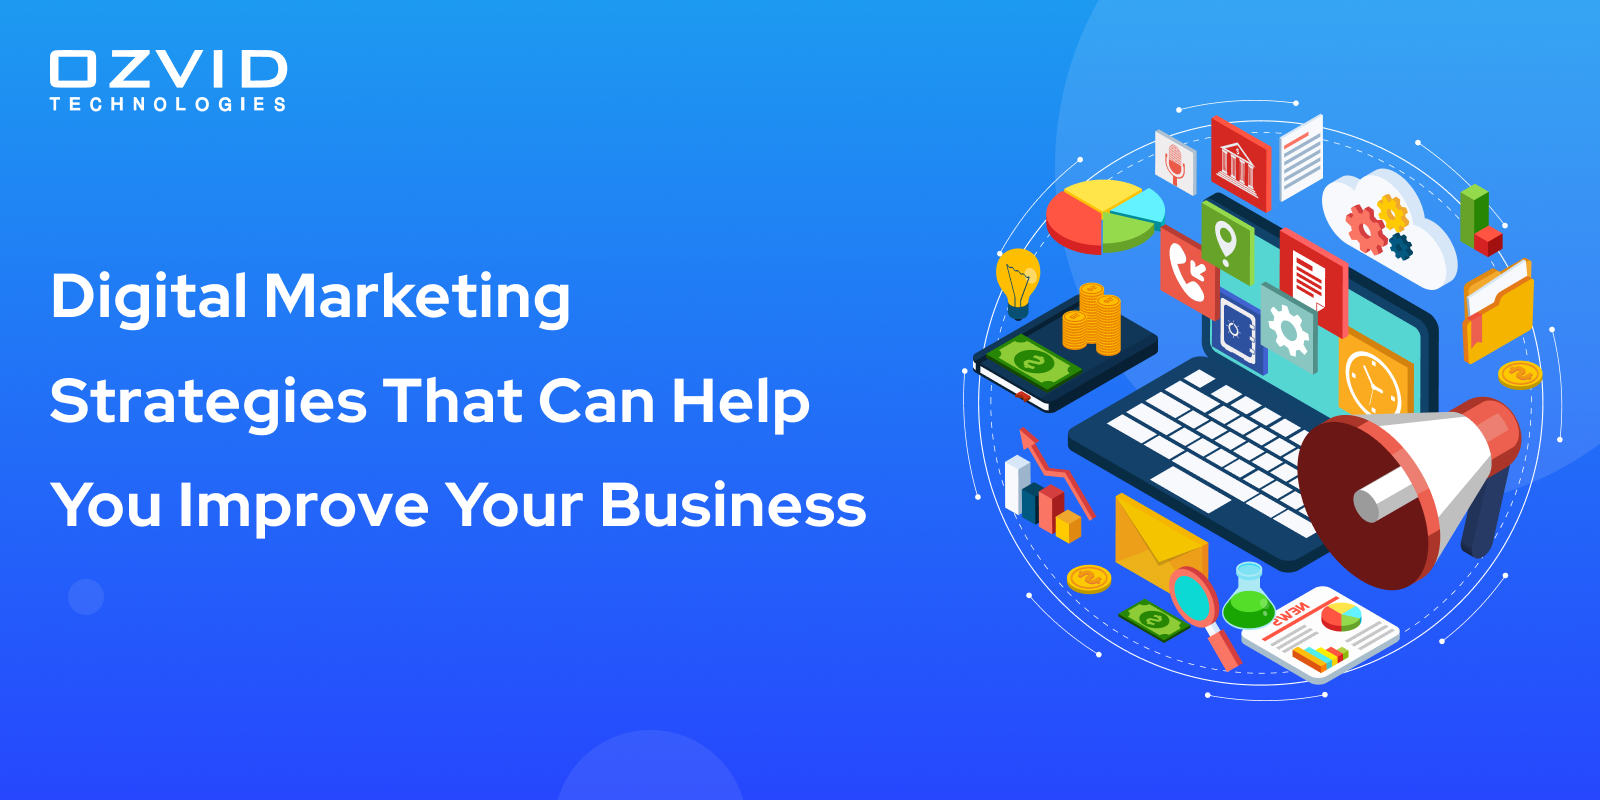 Digital Marketing Strategies That Can Help You Improve Your Business